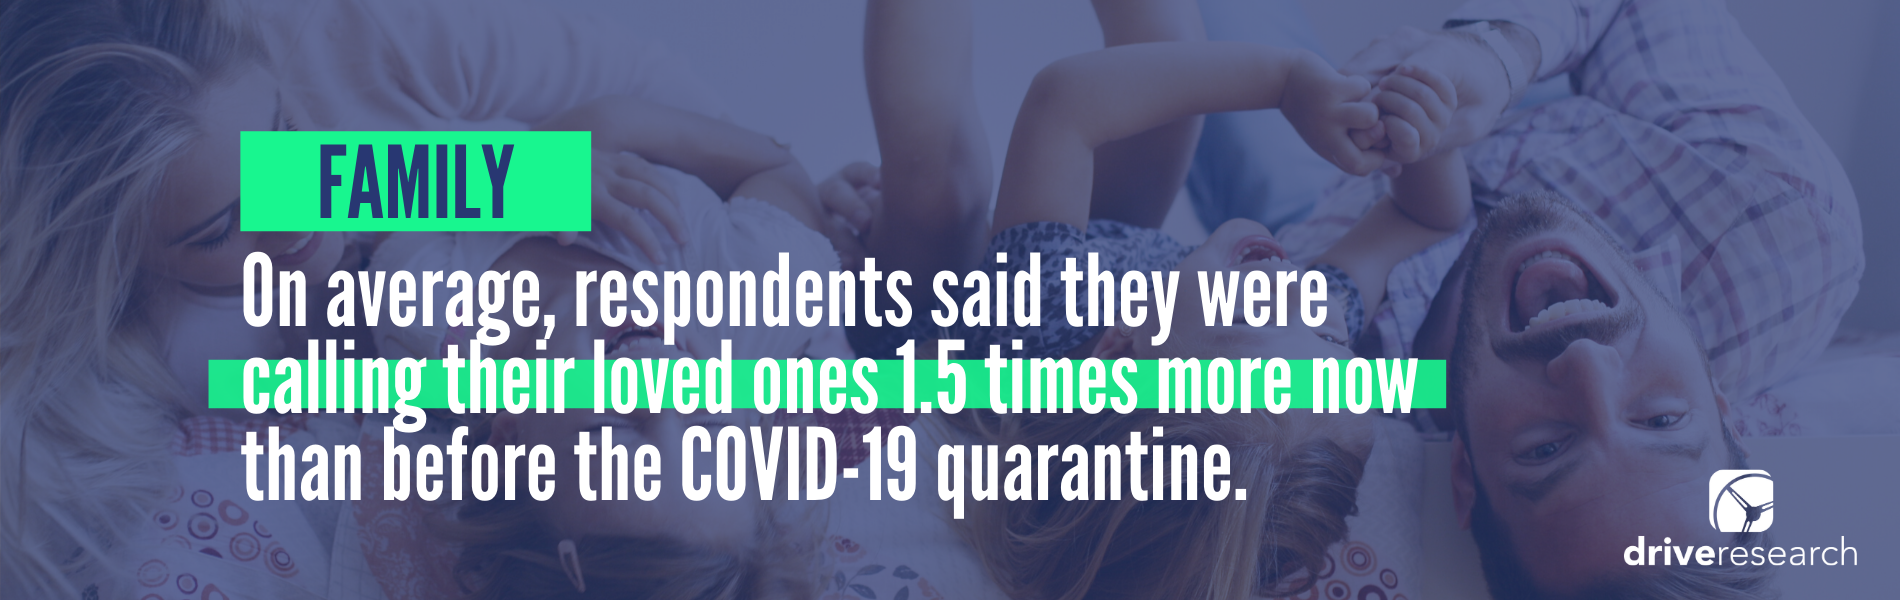 On average, respondents said they were calling their loved ones 1.5 times more now than before the COVID-19 quarantine.